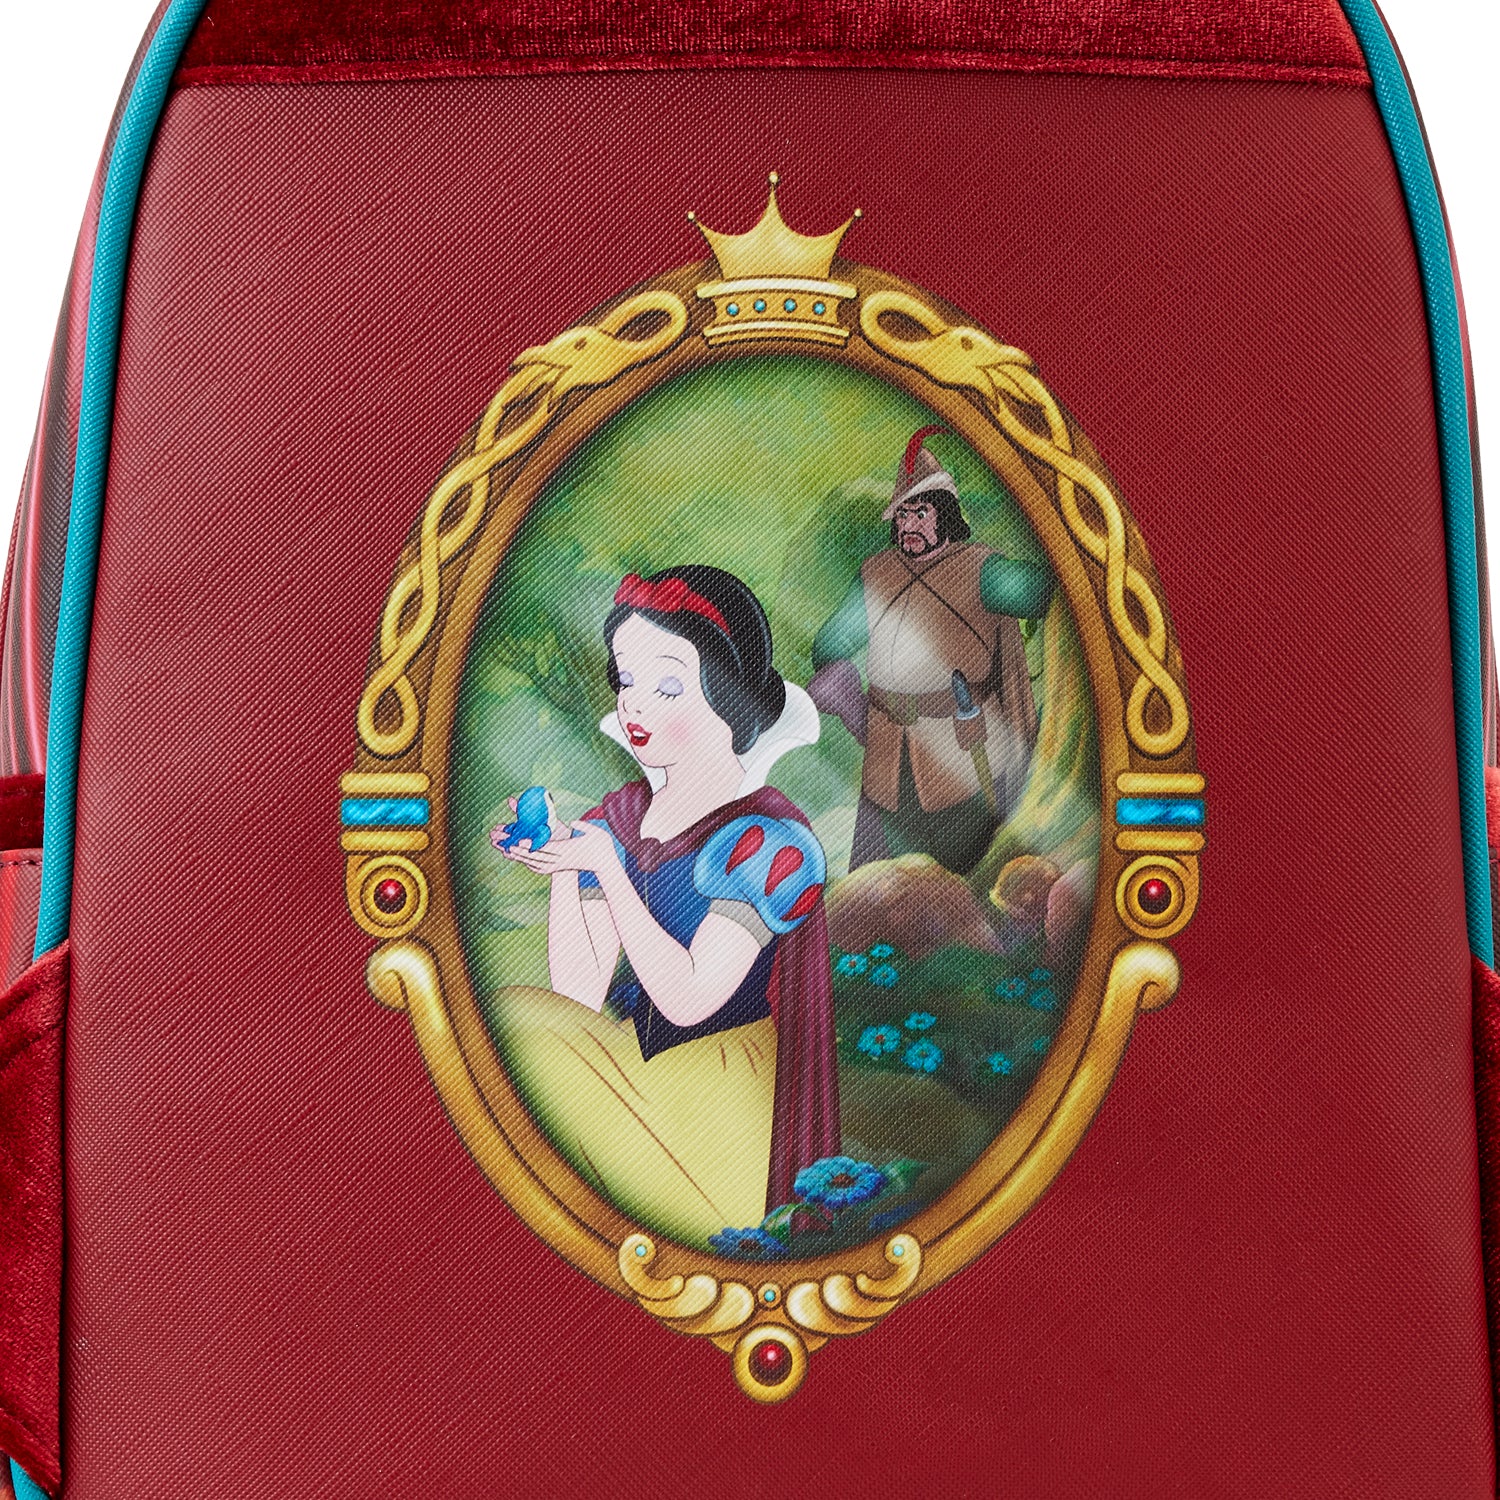 Loungefly - Disney Snow White Evil Queen Throne Mini Backpack - FINALSALE